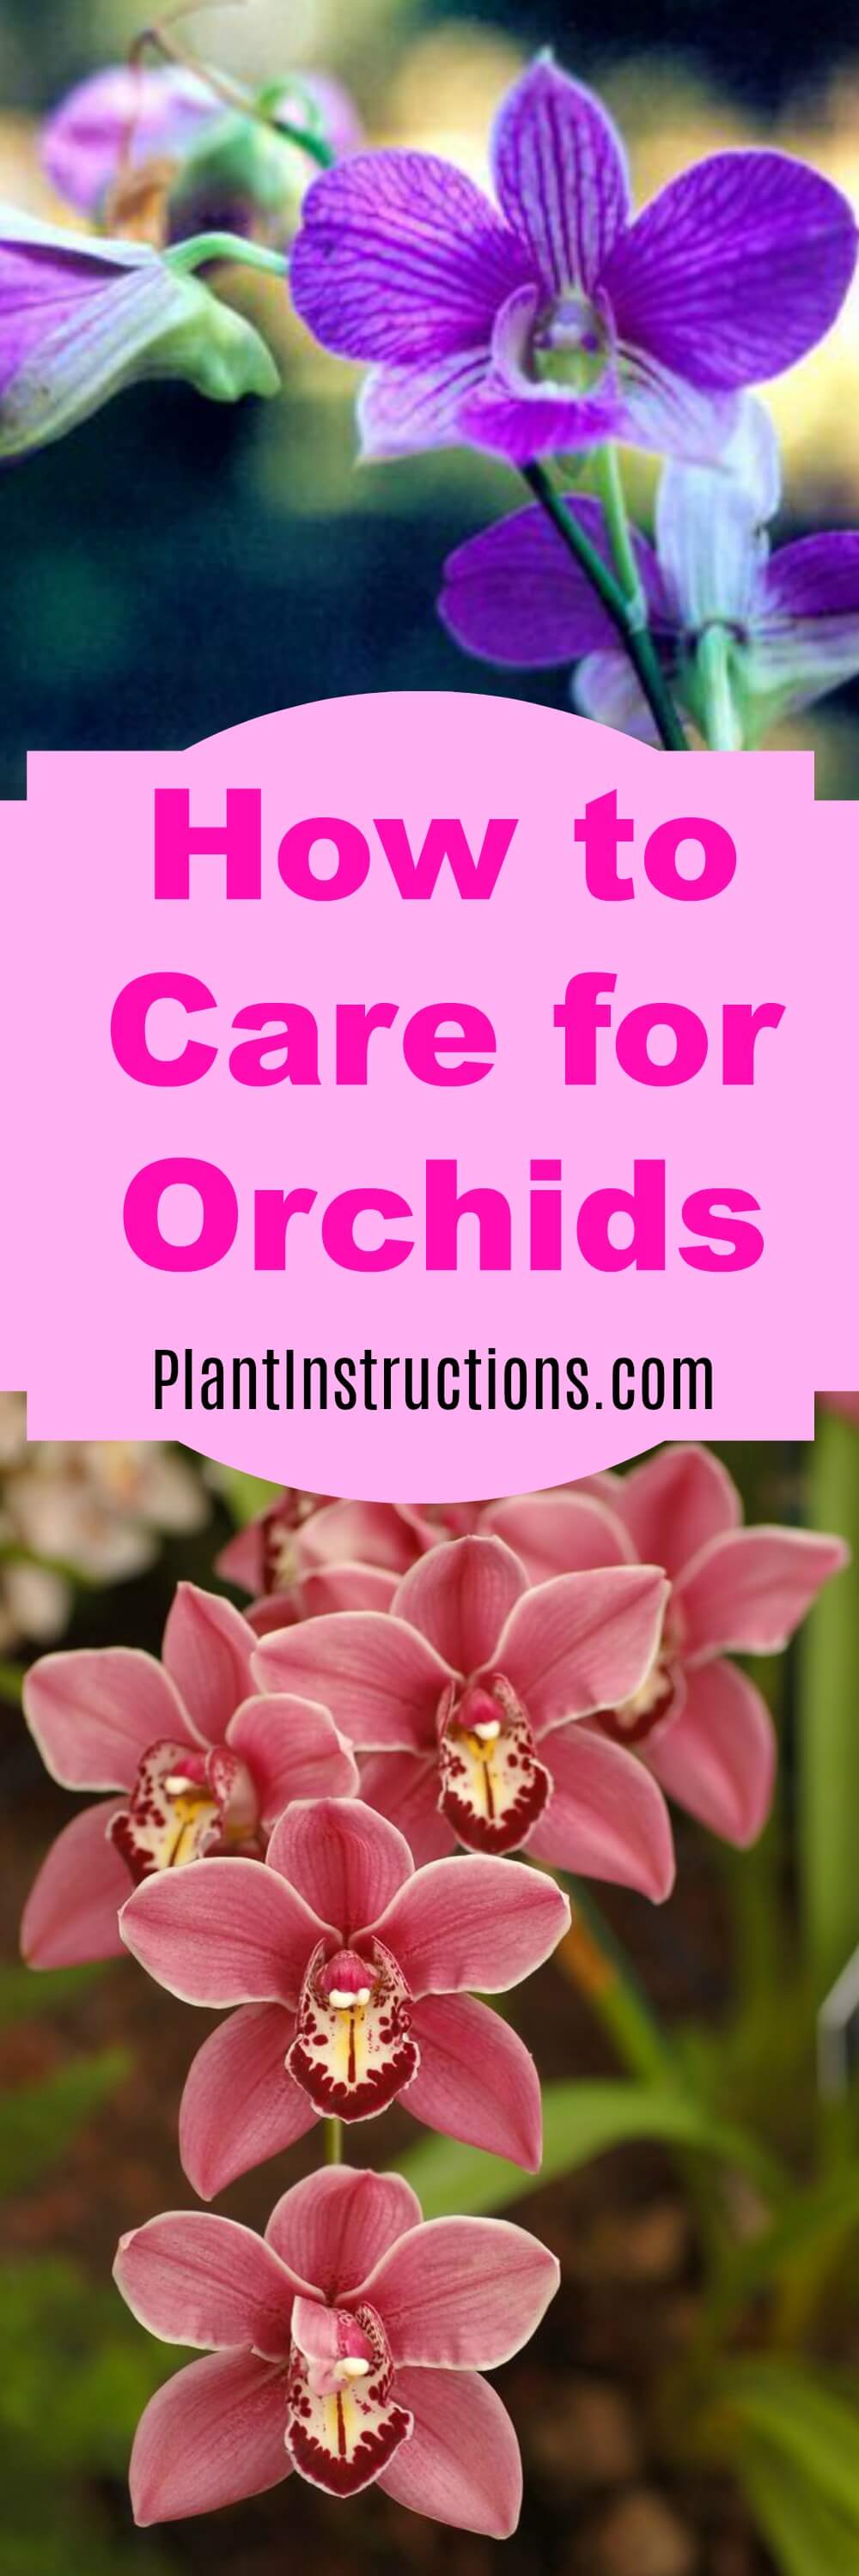 how-to-care-for-orchids-plant-instructions